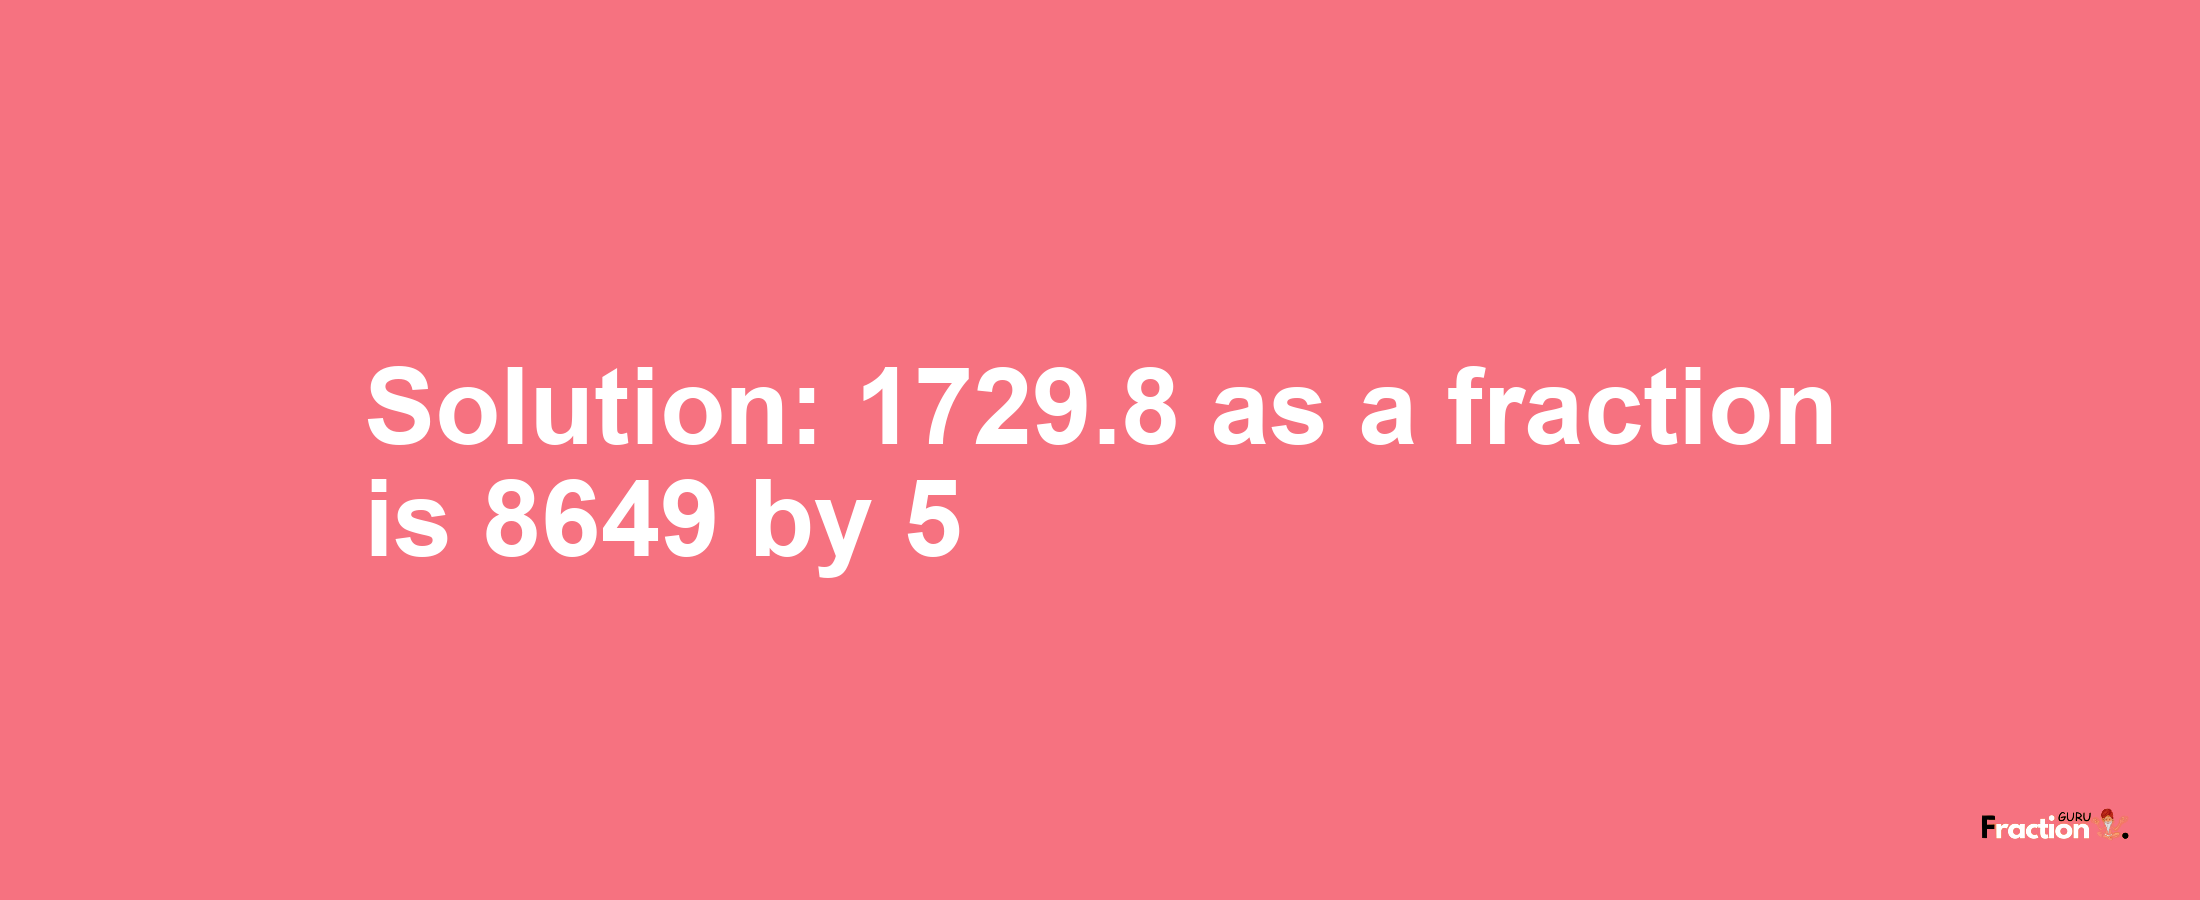 Solution:1729.8 as a fraction is 8649/5